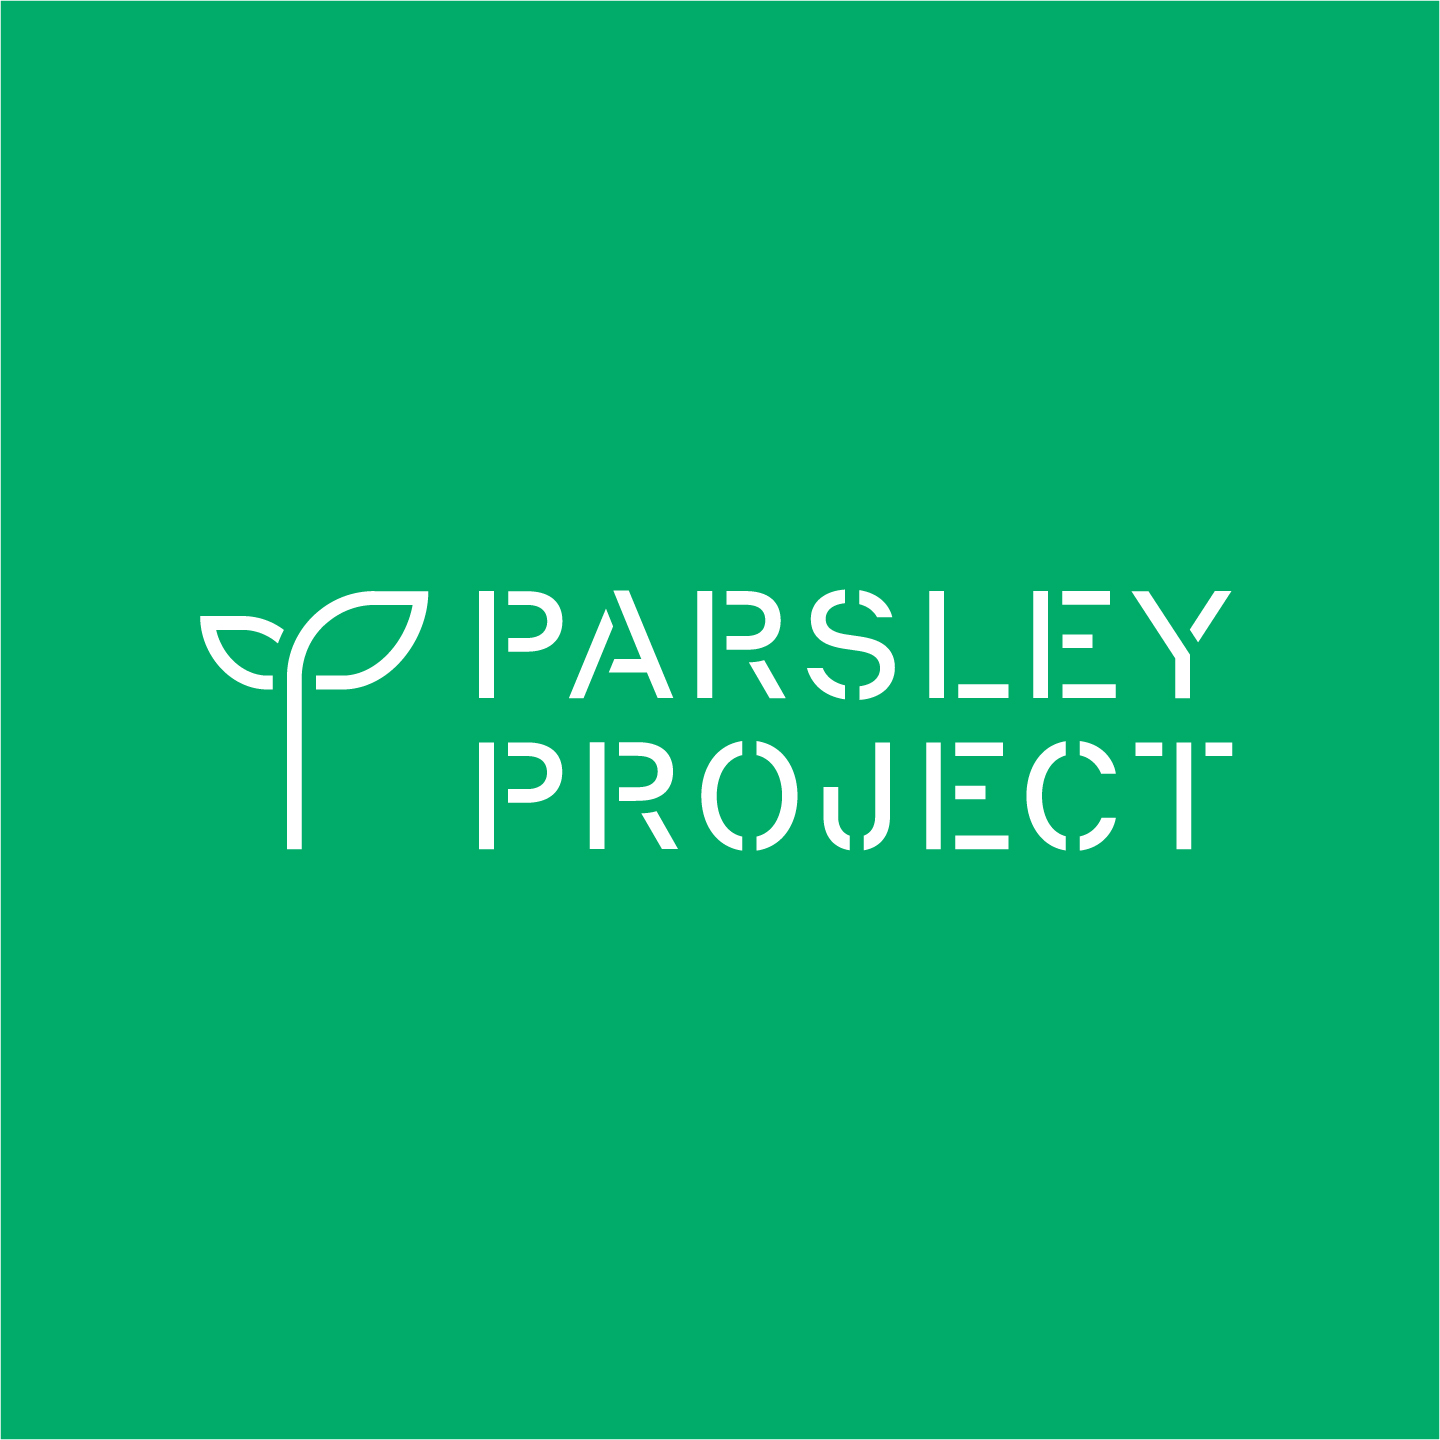 Parsley Project logo by Hunter Oden of oden.house